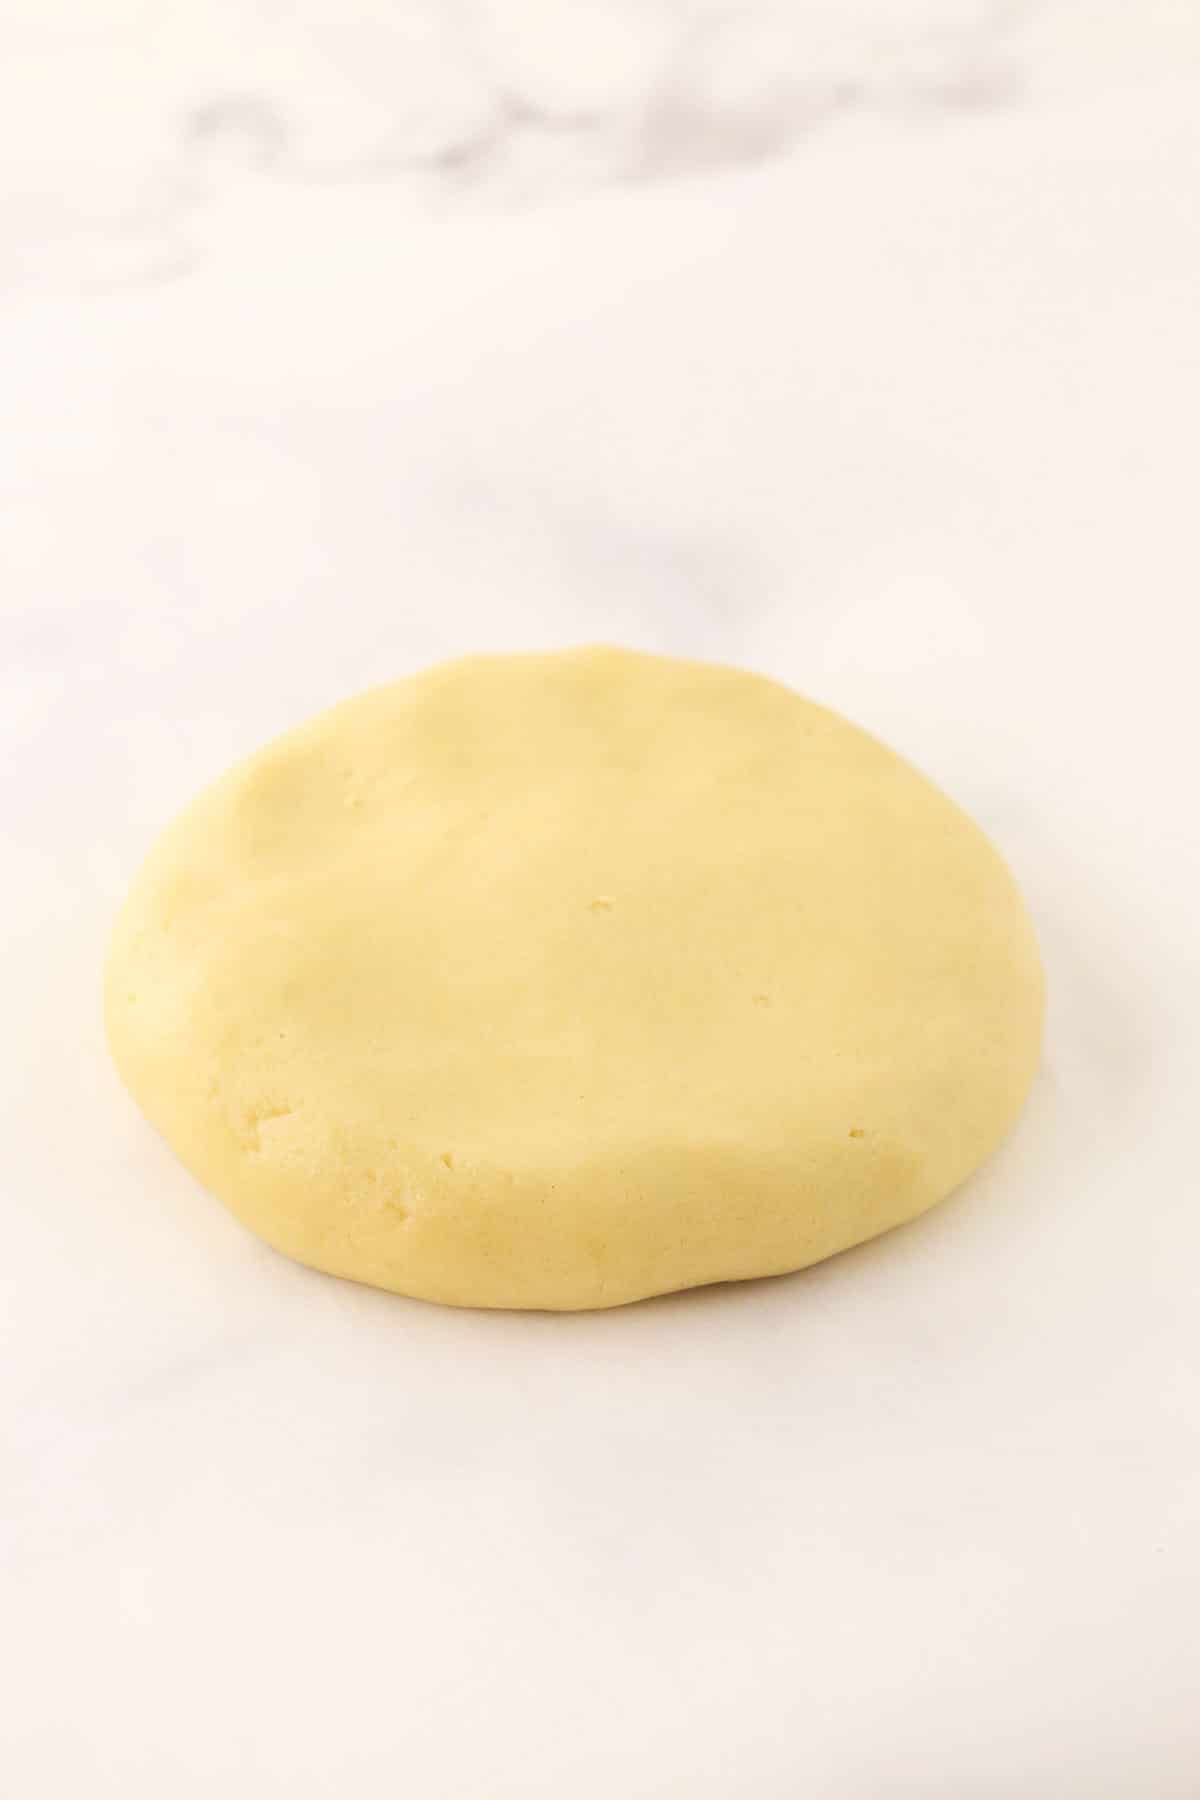 A smooth disc of dough on a granite surface